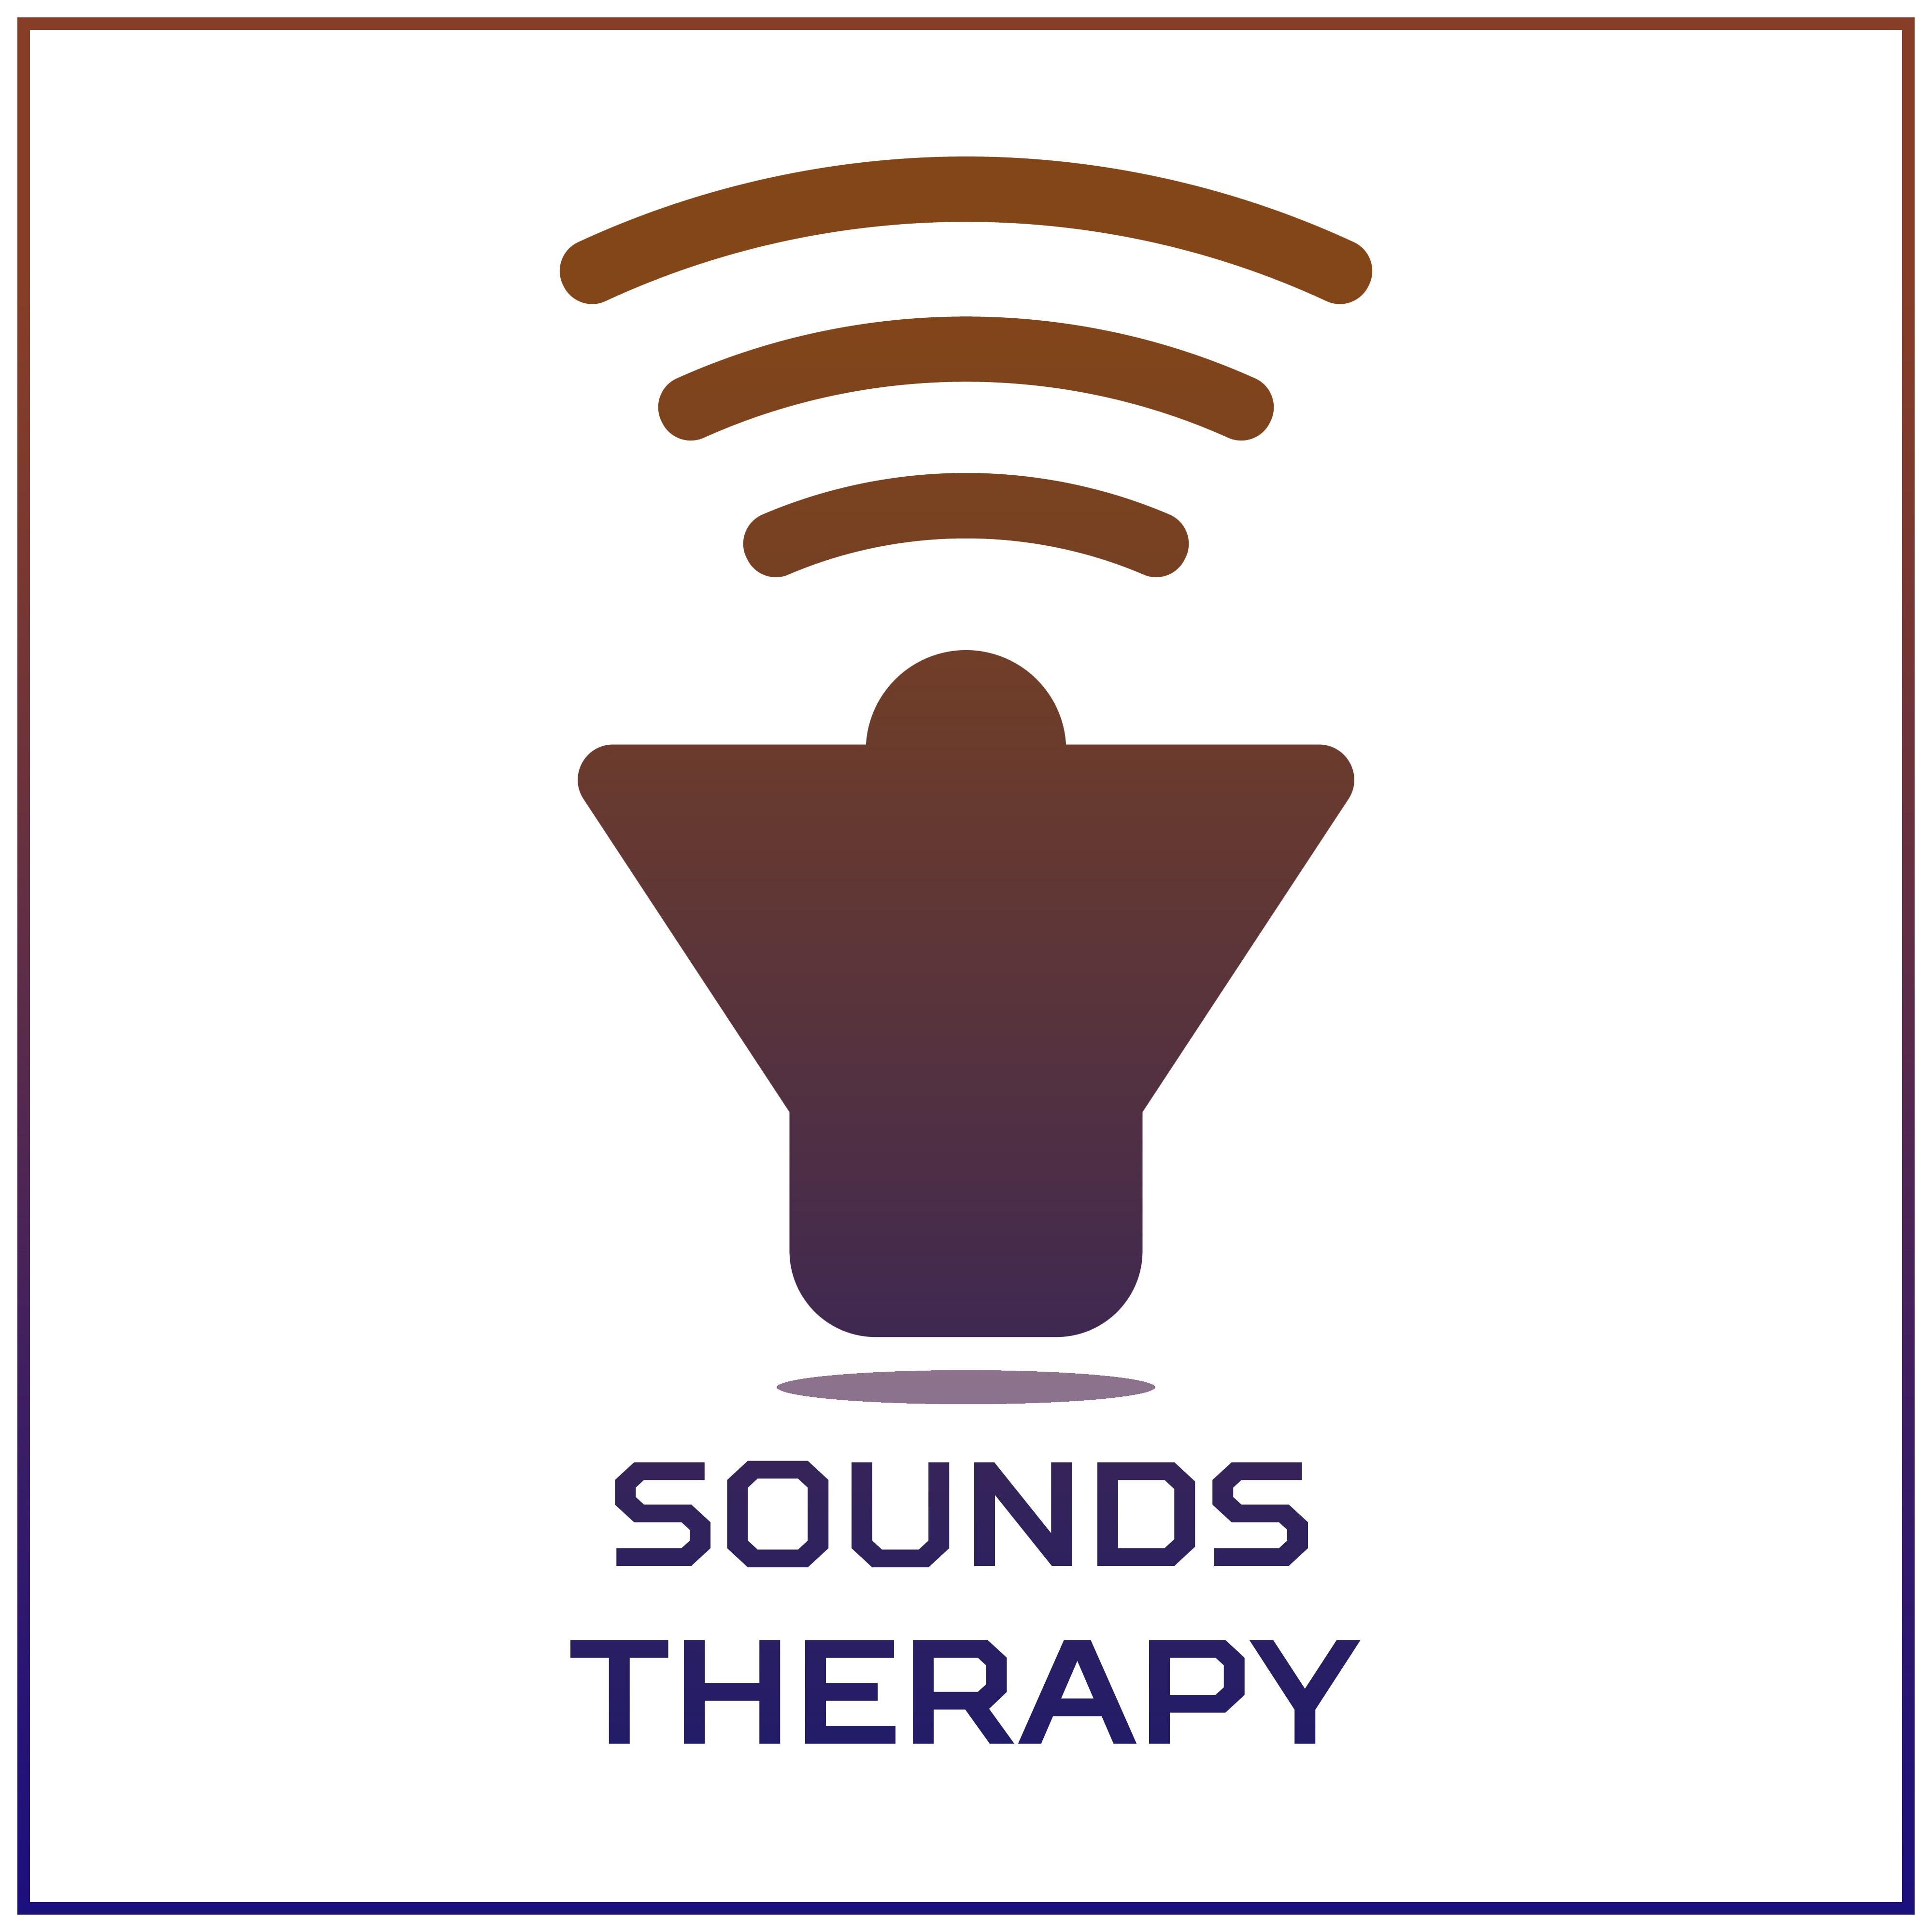 Sounds Therapy – Nature Sounds, Deep Relaxation, New Age, Relaxing Music Therapy, Bliss, Zen